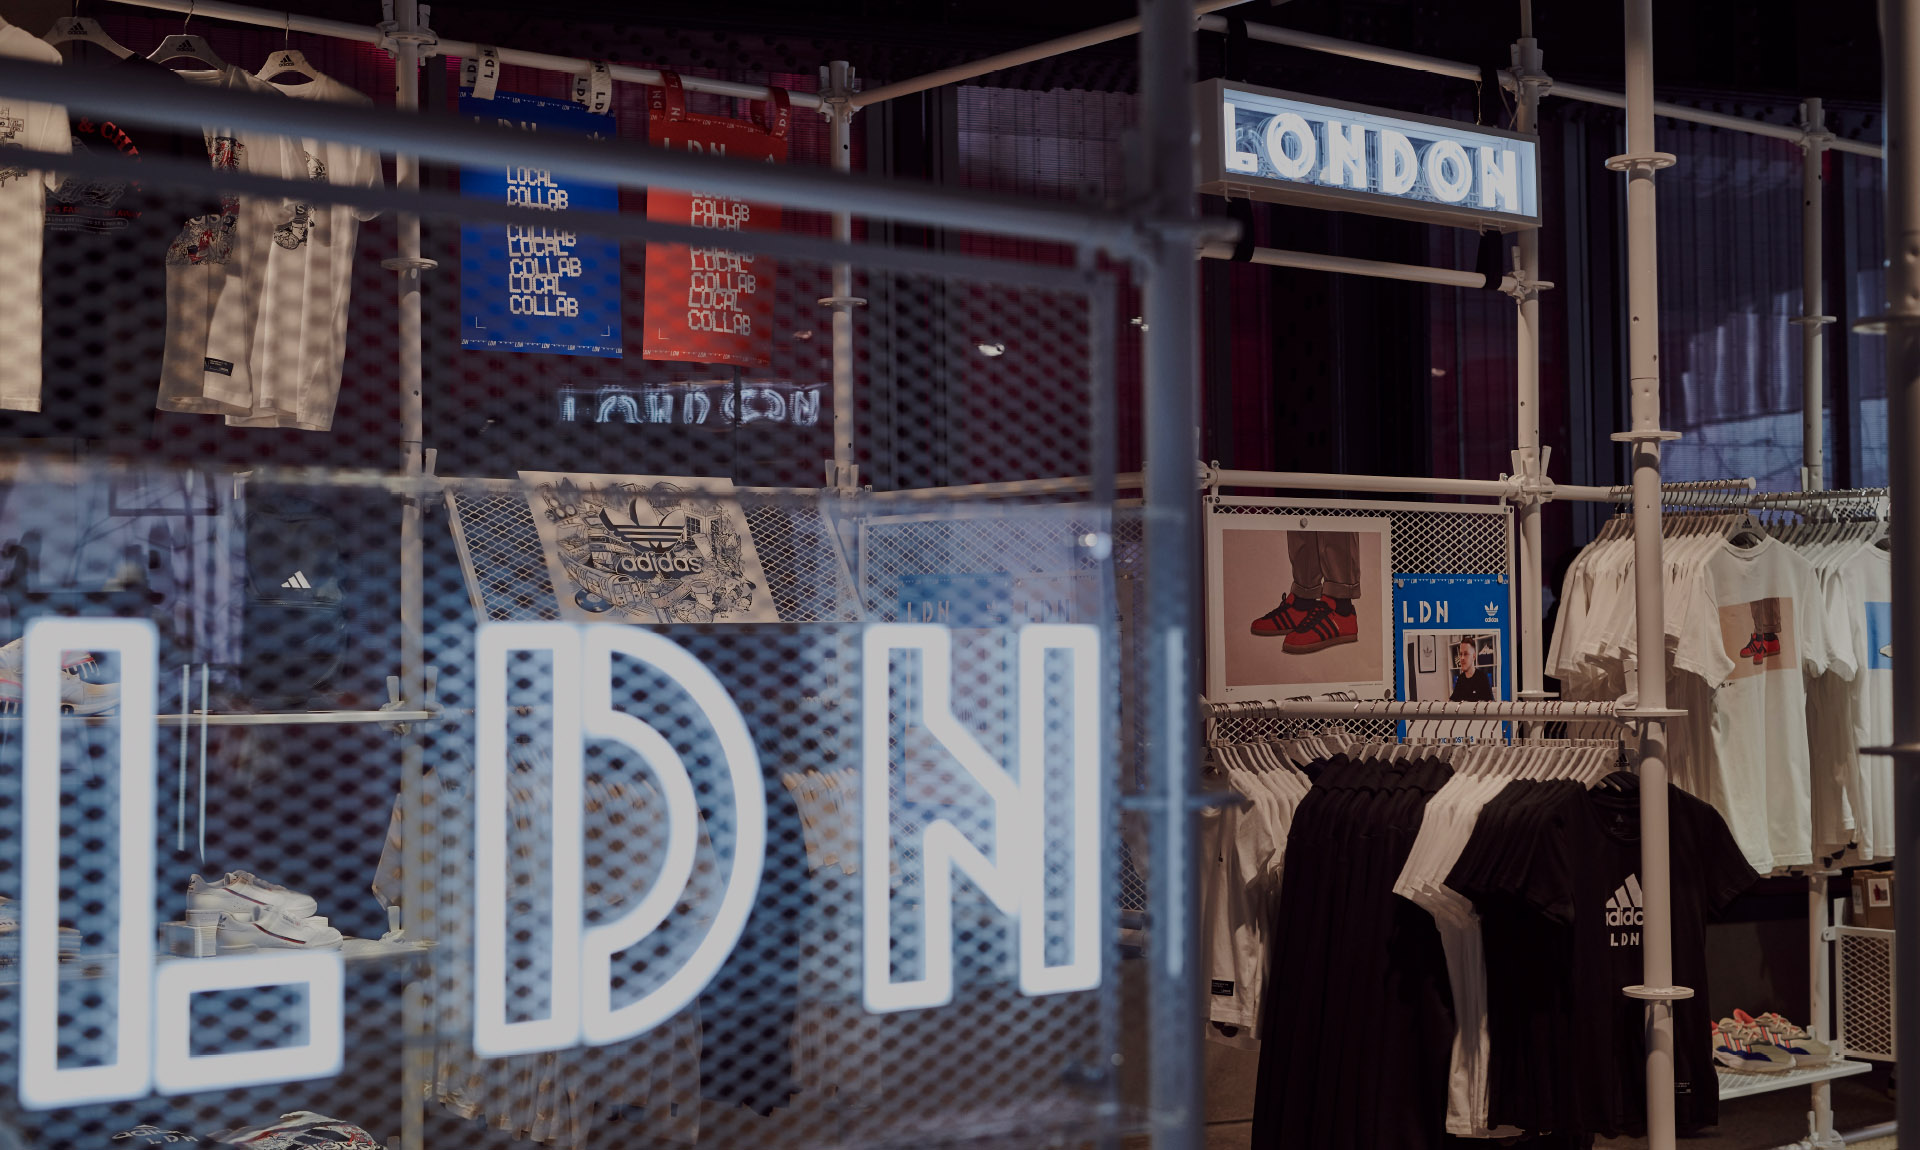 ADIDAS LDN: THE MOST DIGITAL ADIDAS STORE TO DATE (Signature)